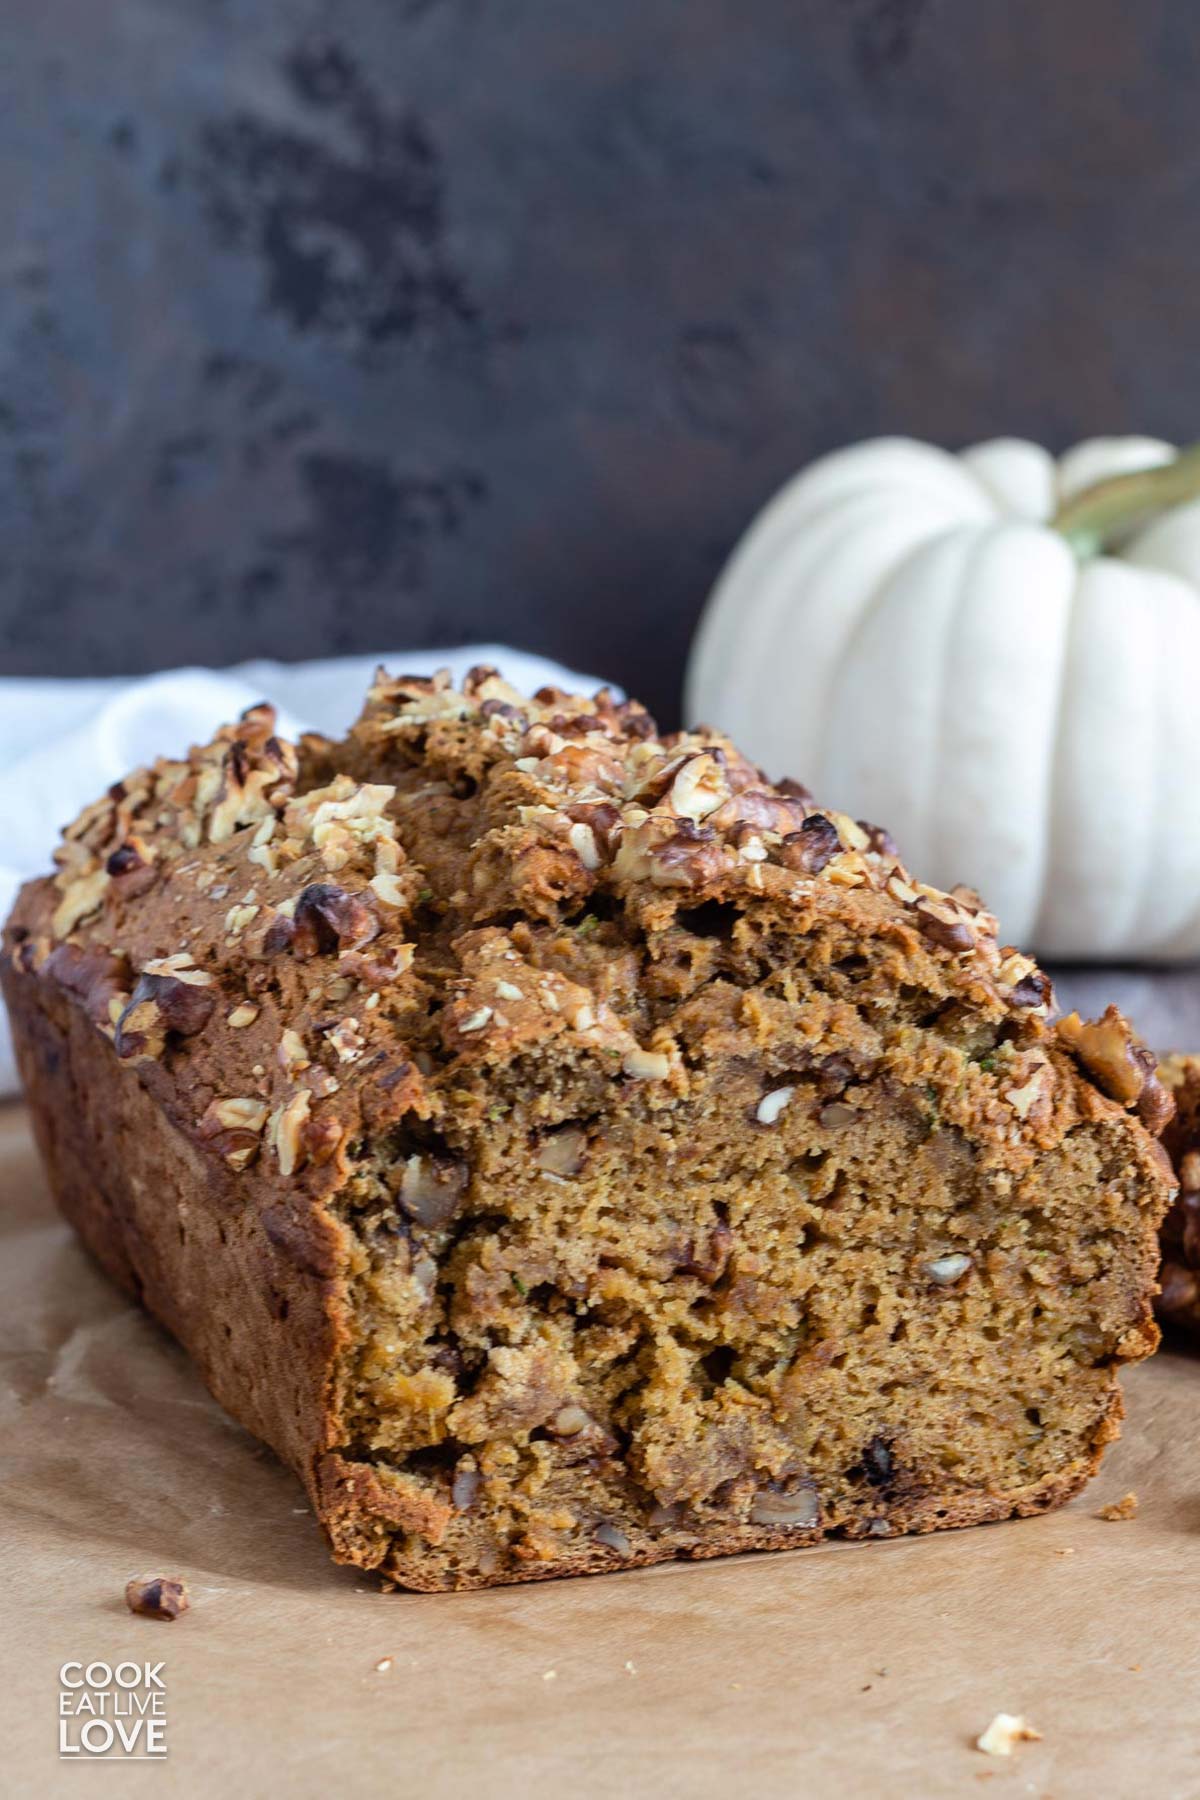 Loaf of pumpkin zucchini bread on the table with a slice cut to show the inside.